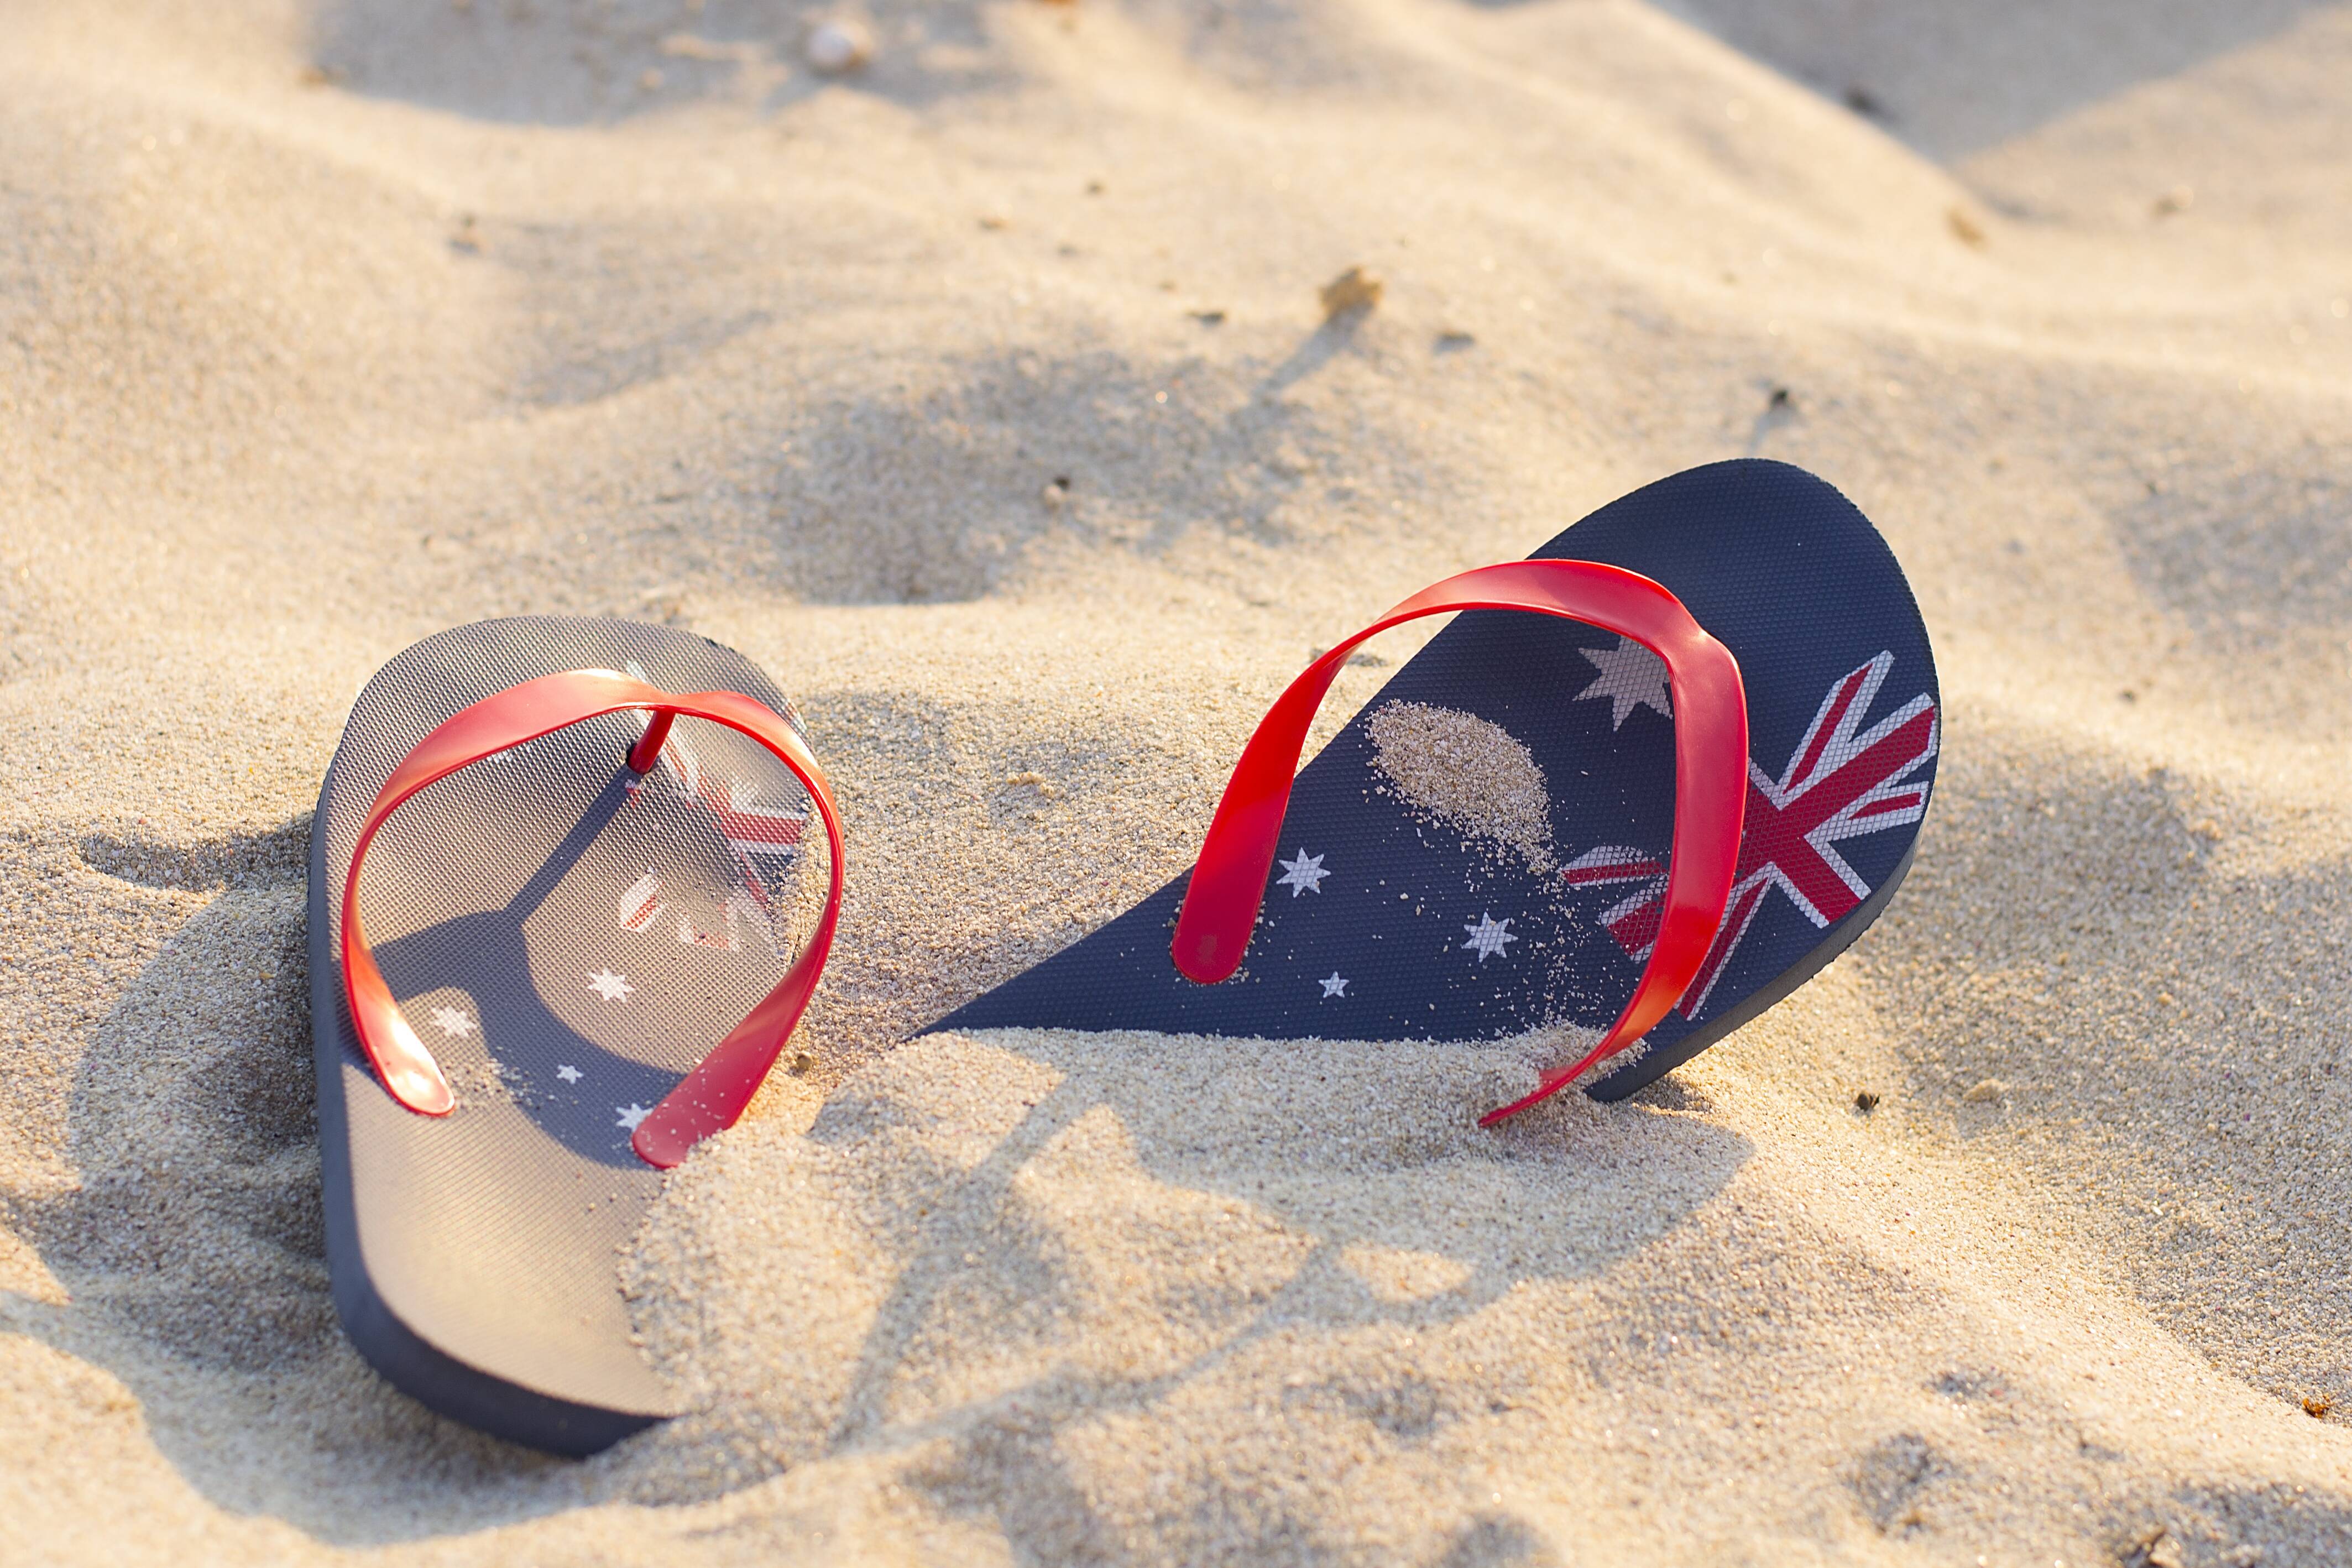 A pair of thongs isn't as Australian as you might think